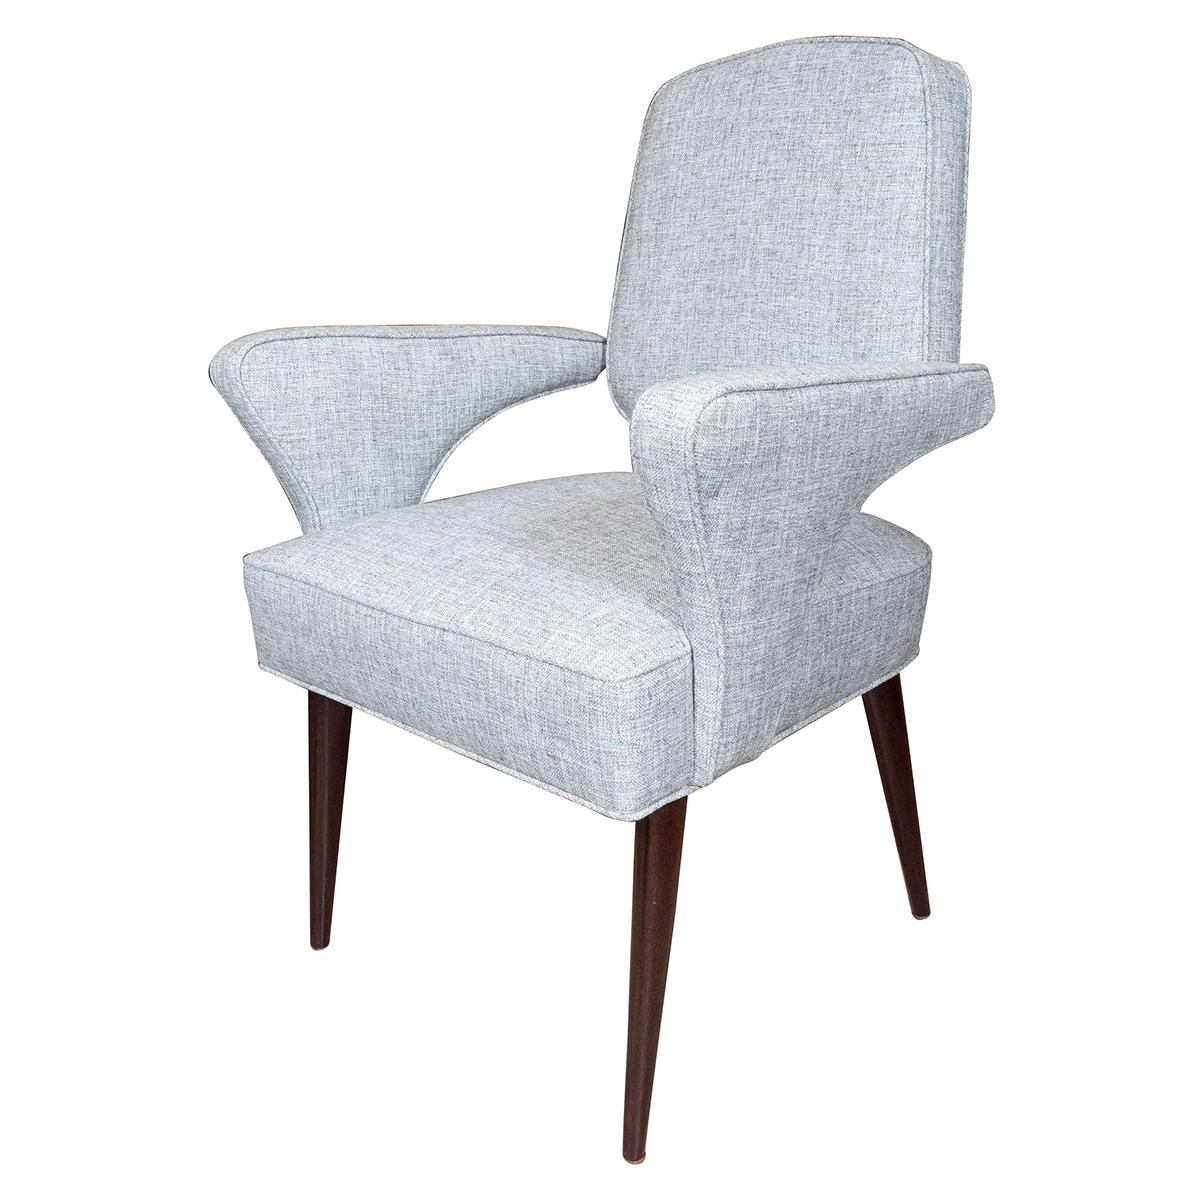 Pair of Stylized Armchairs with Crossbar Back